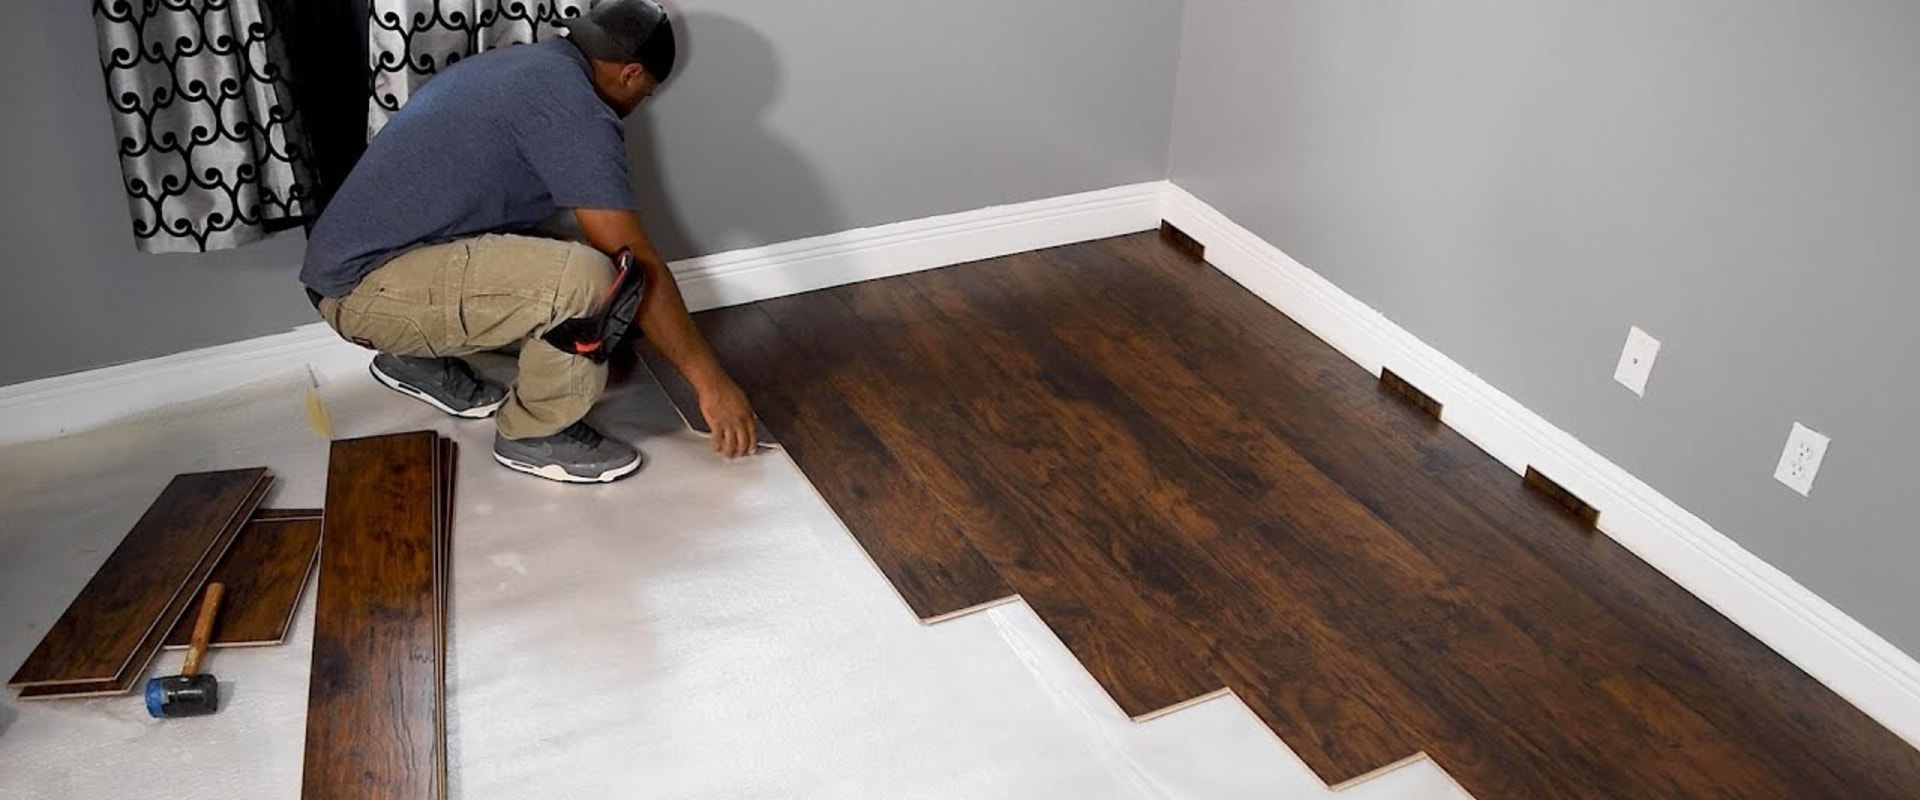 How long does it take for laminate flooring to settle after installation?